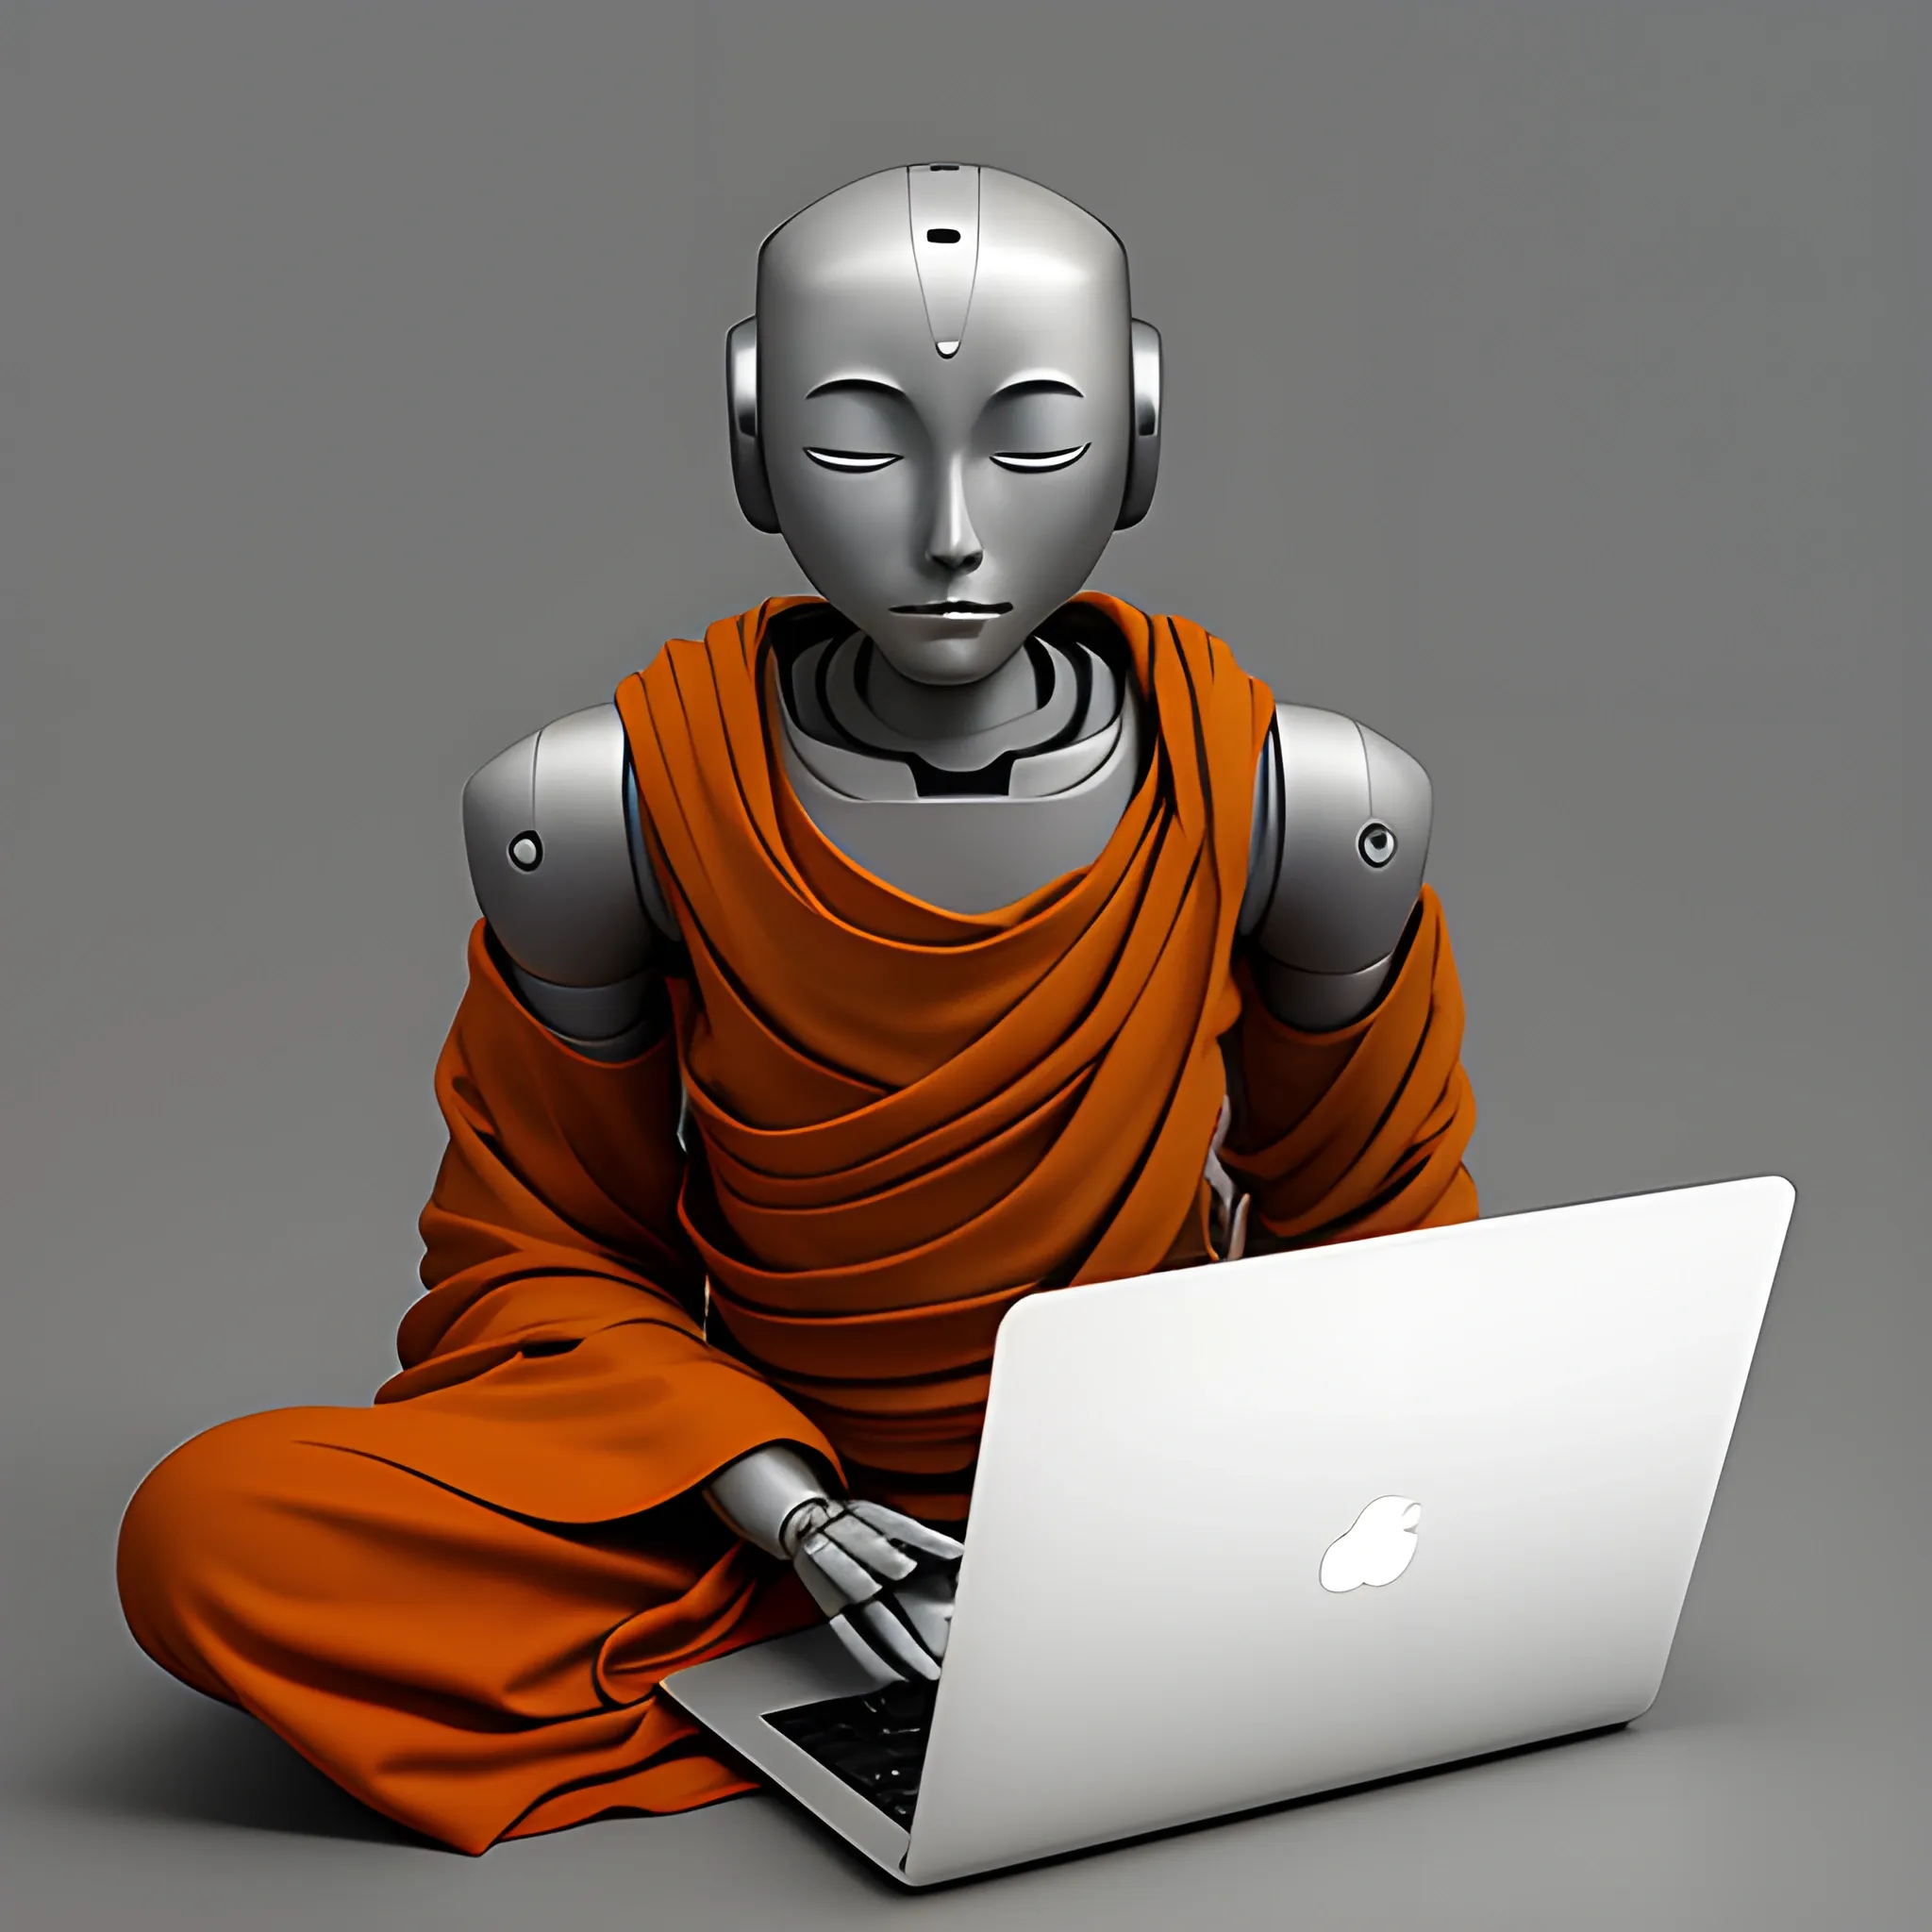 a portrait of calm monk robot sitting in meditation with laptop